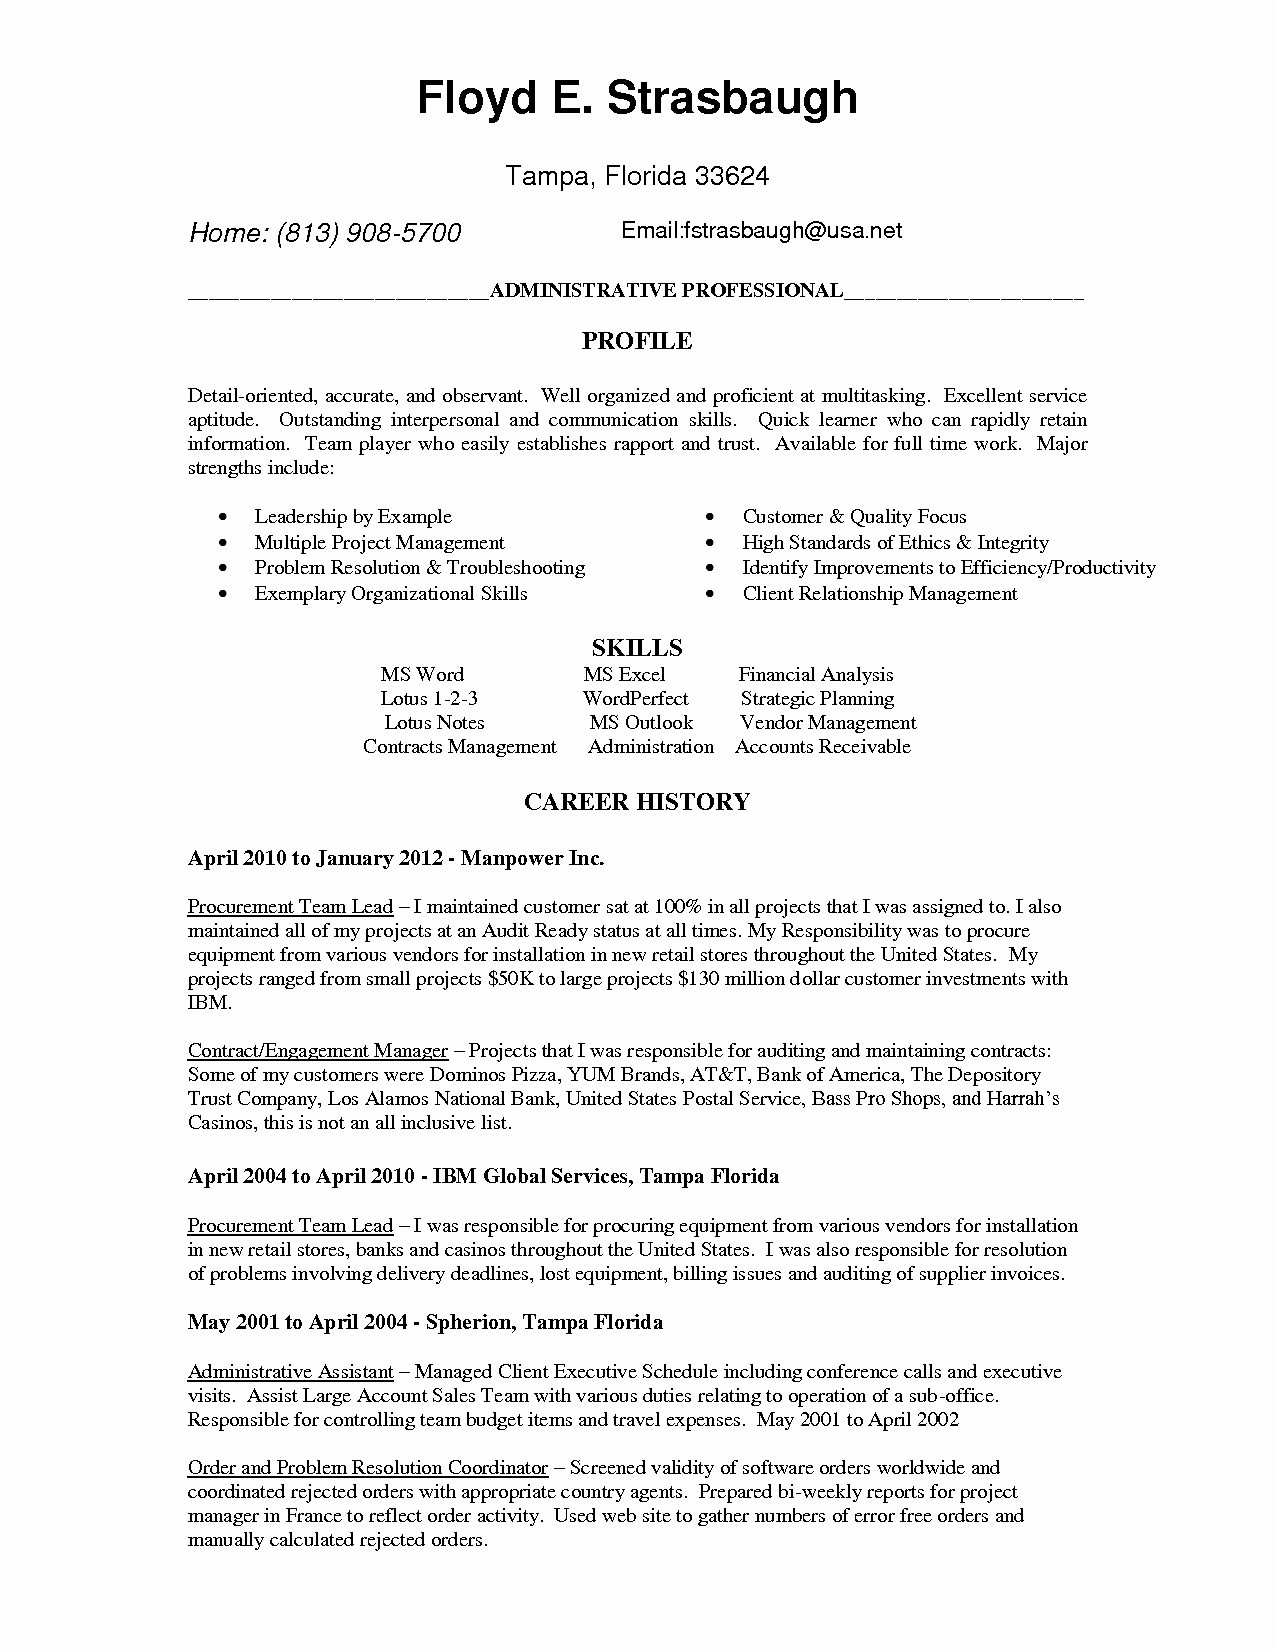 Cover Letter Template Word Job Application - â Free Microsoft Word Resume Templates Awesome Professional Job